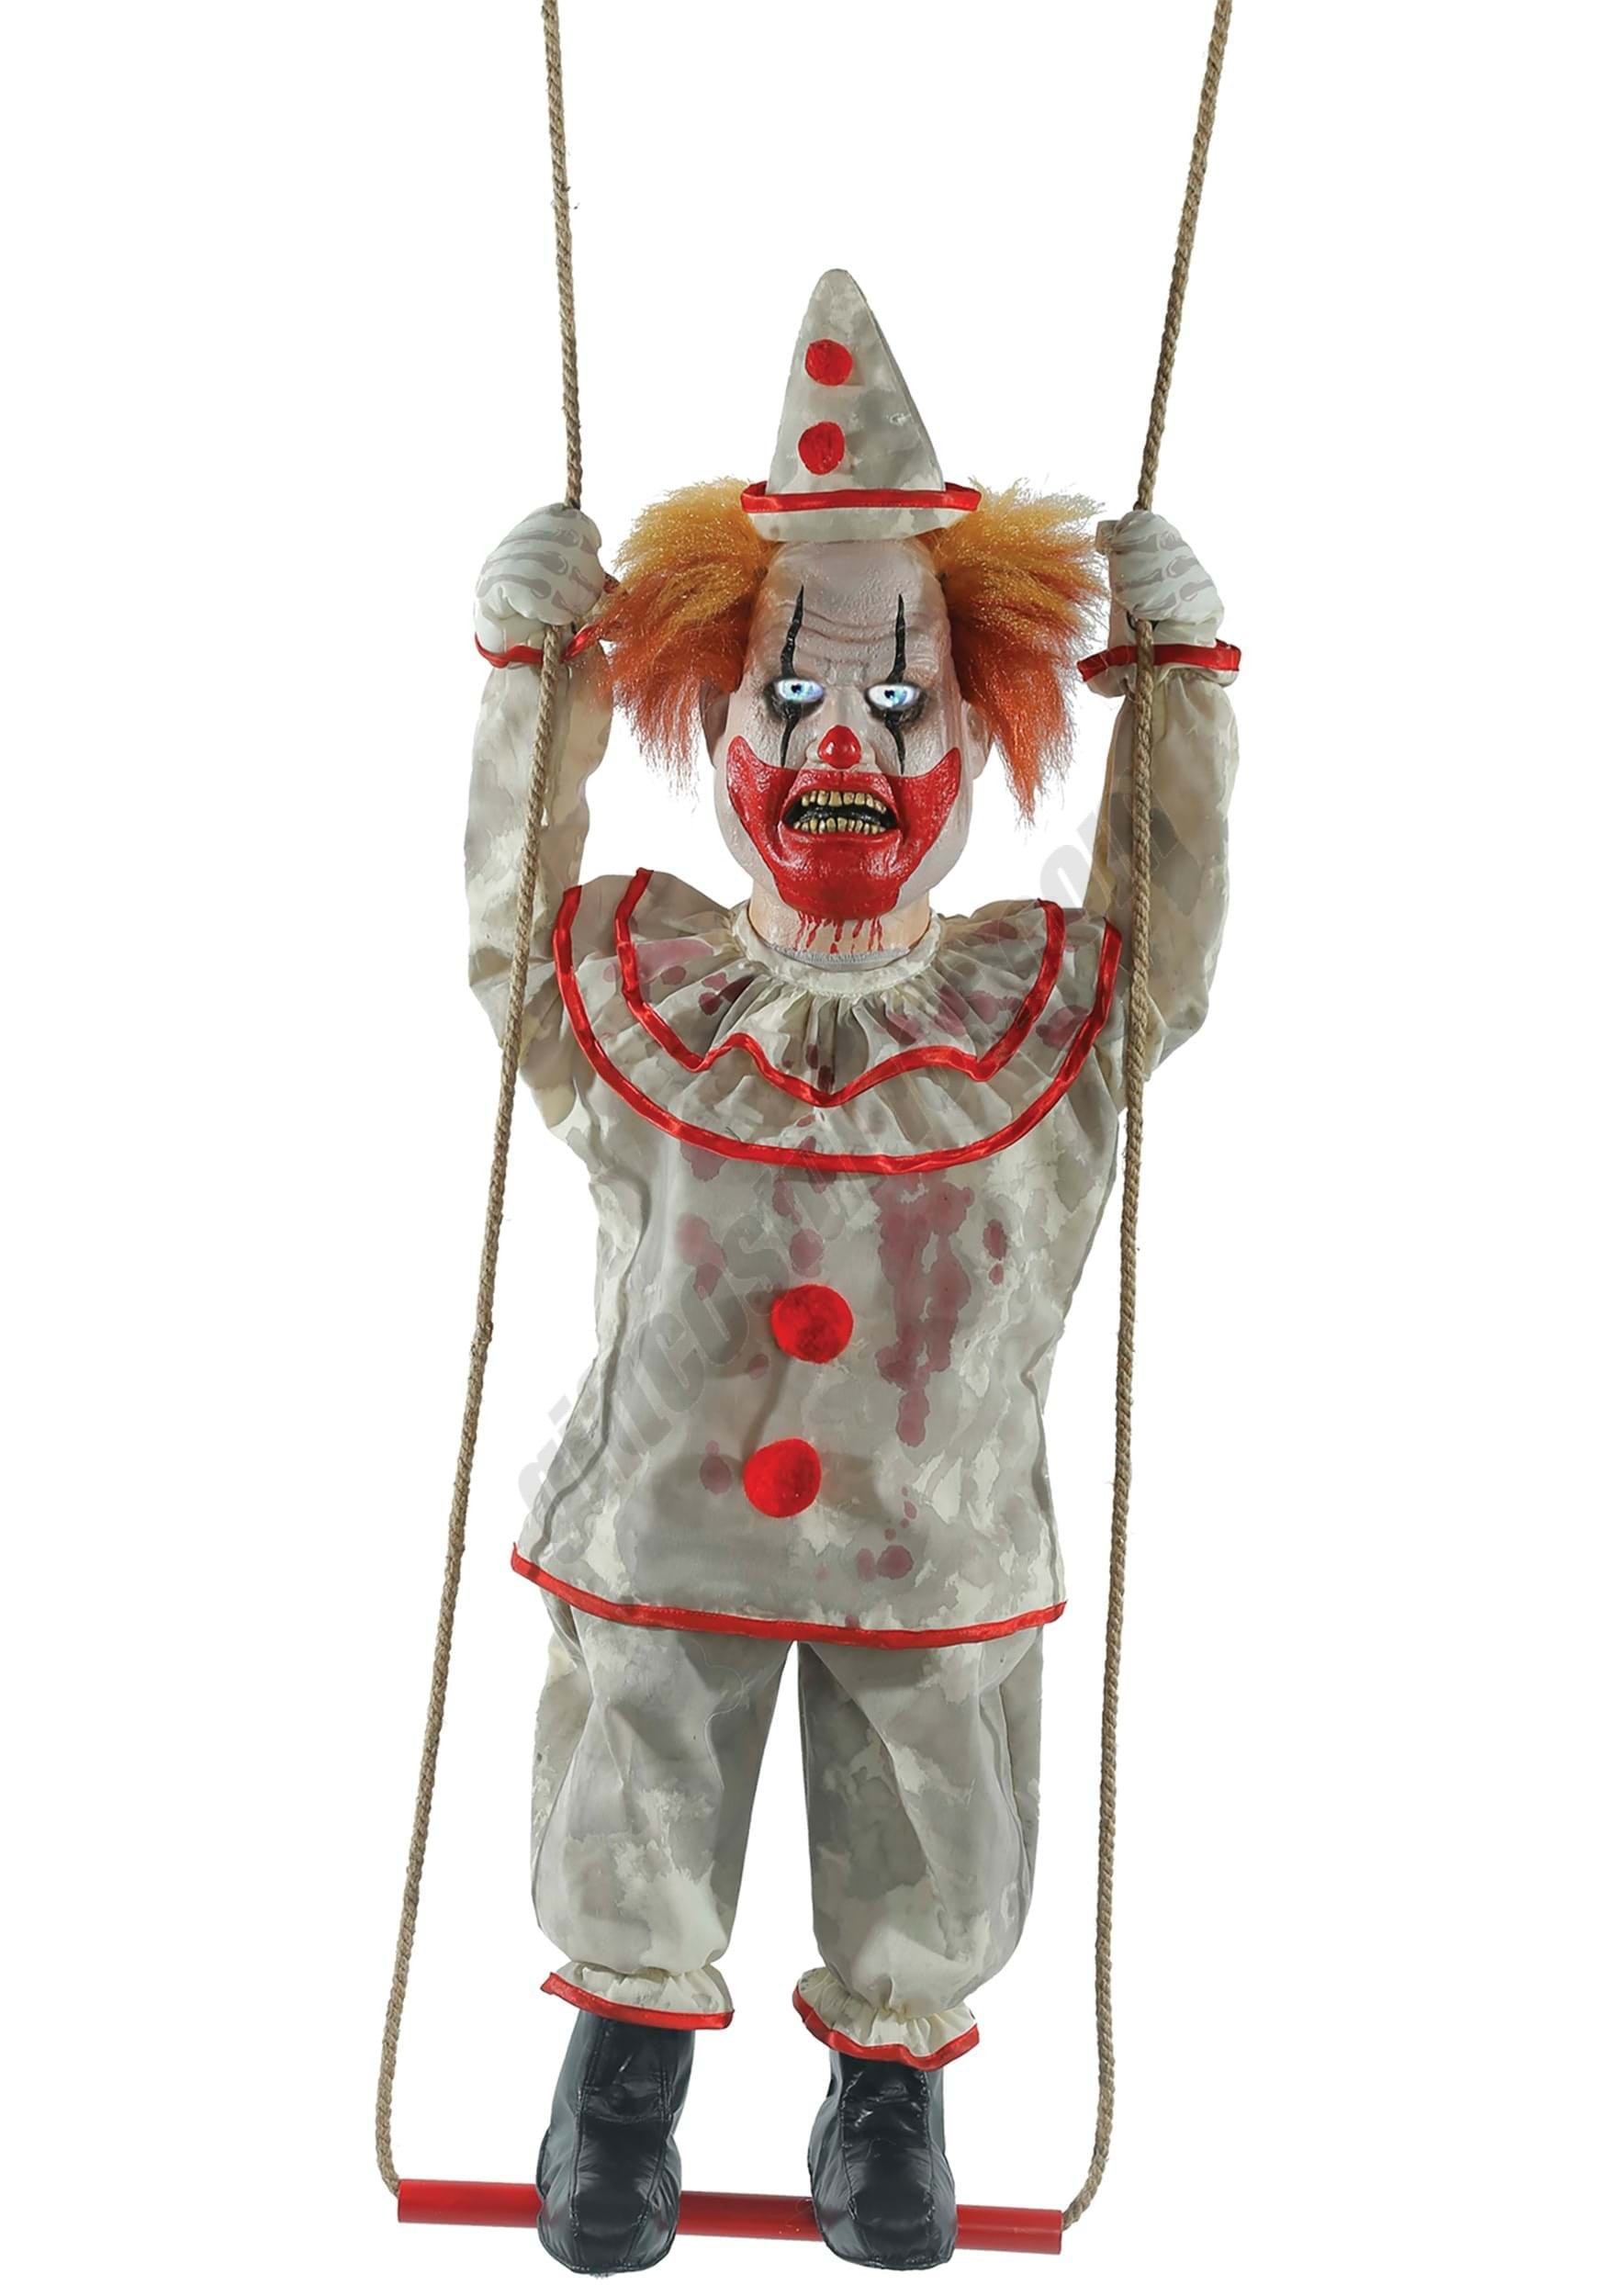 Swinging Animated Happy Clown Doll Promotions - Swinging Animated Happy Clown Doll Promotions